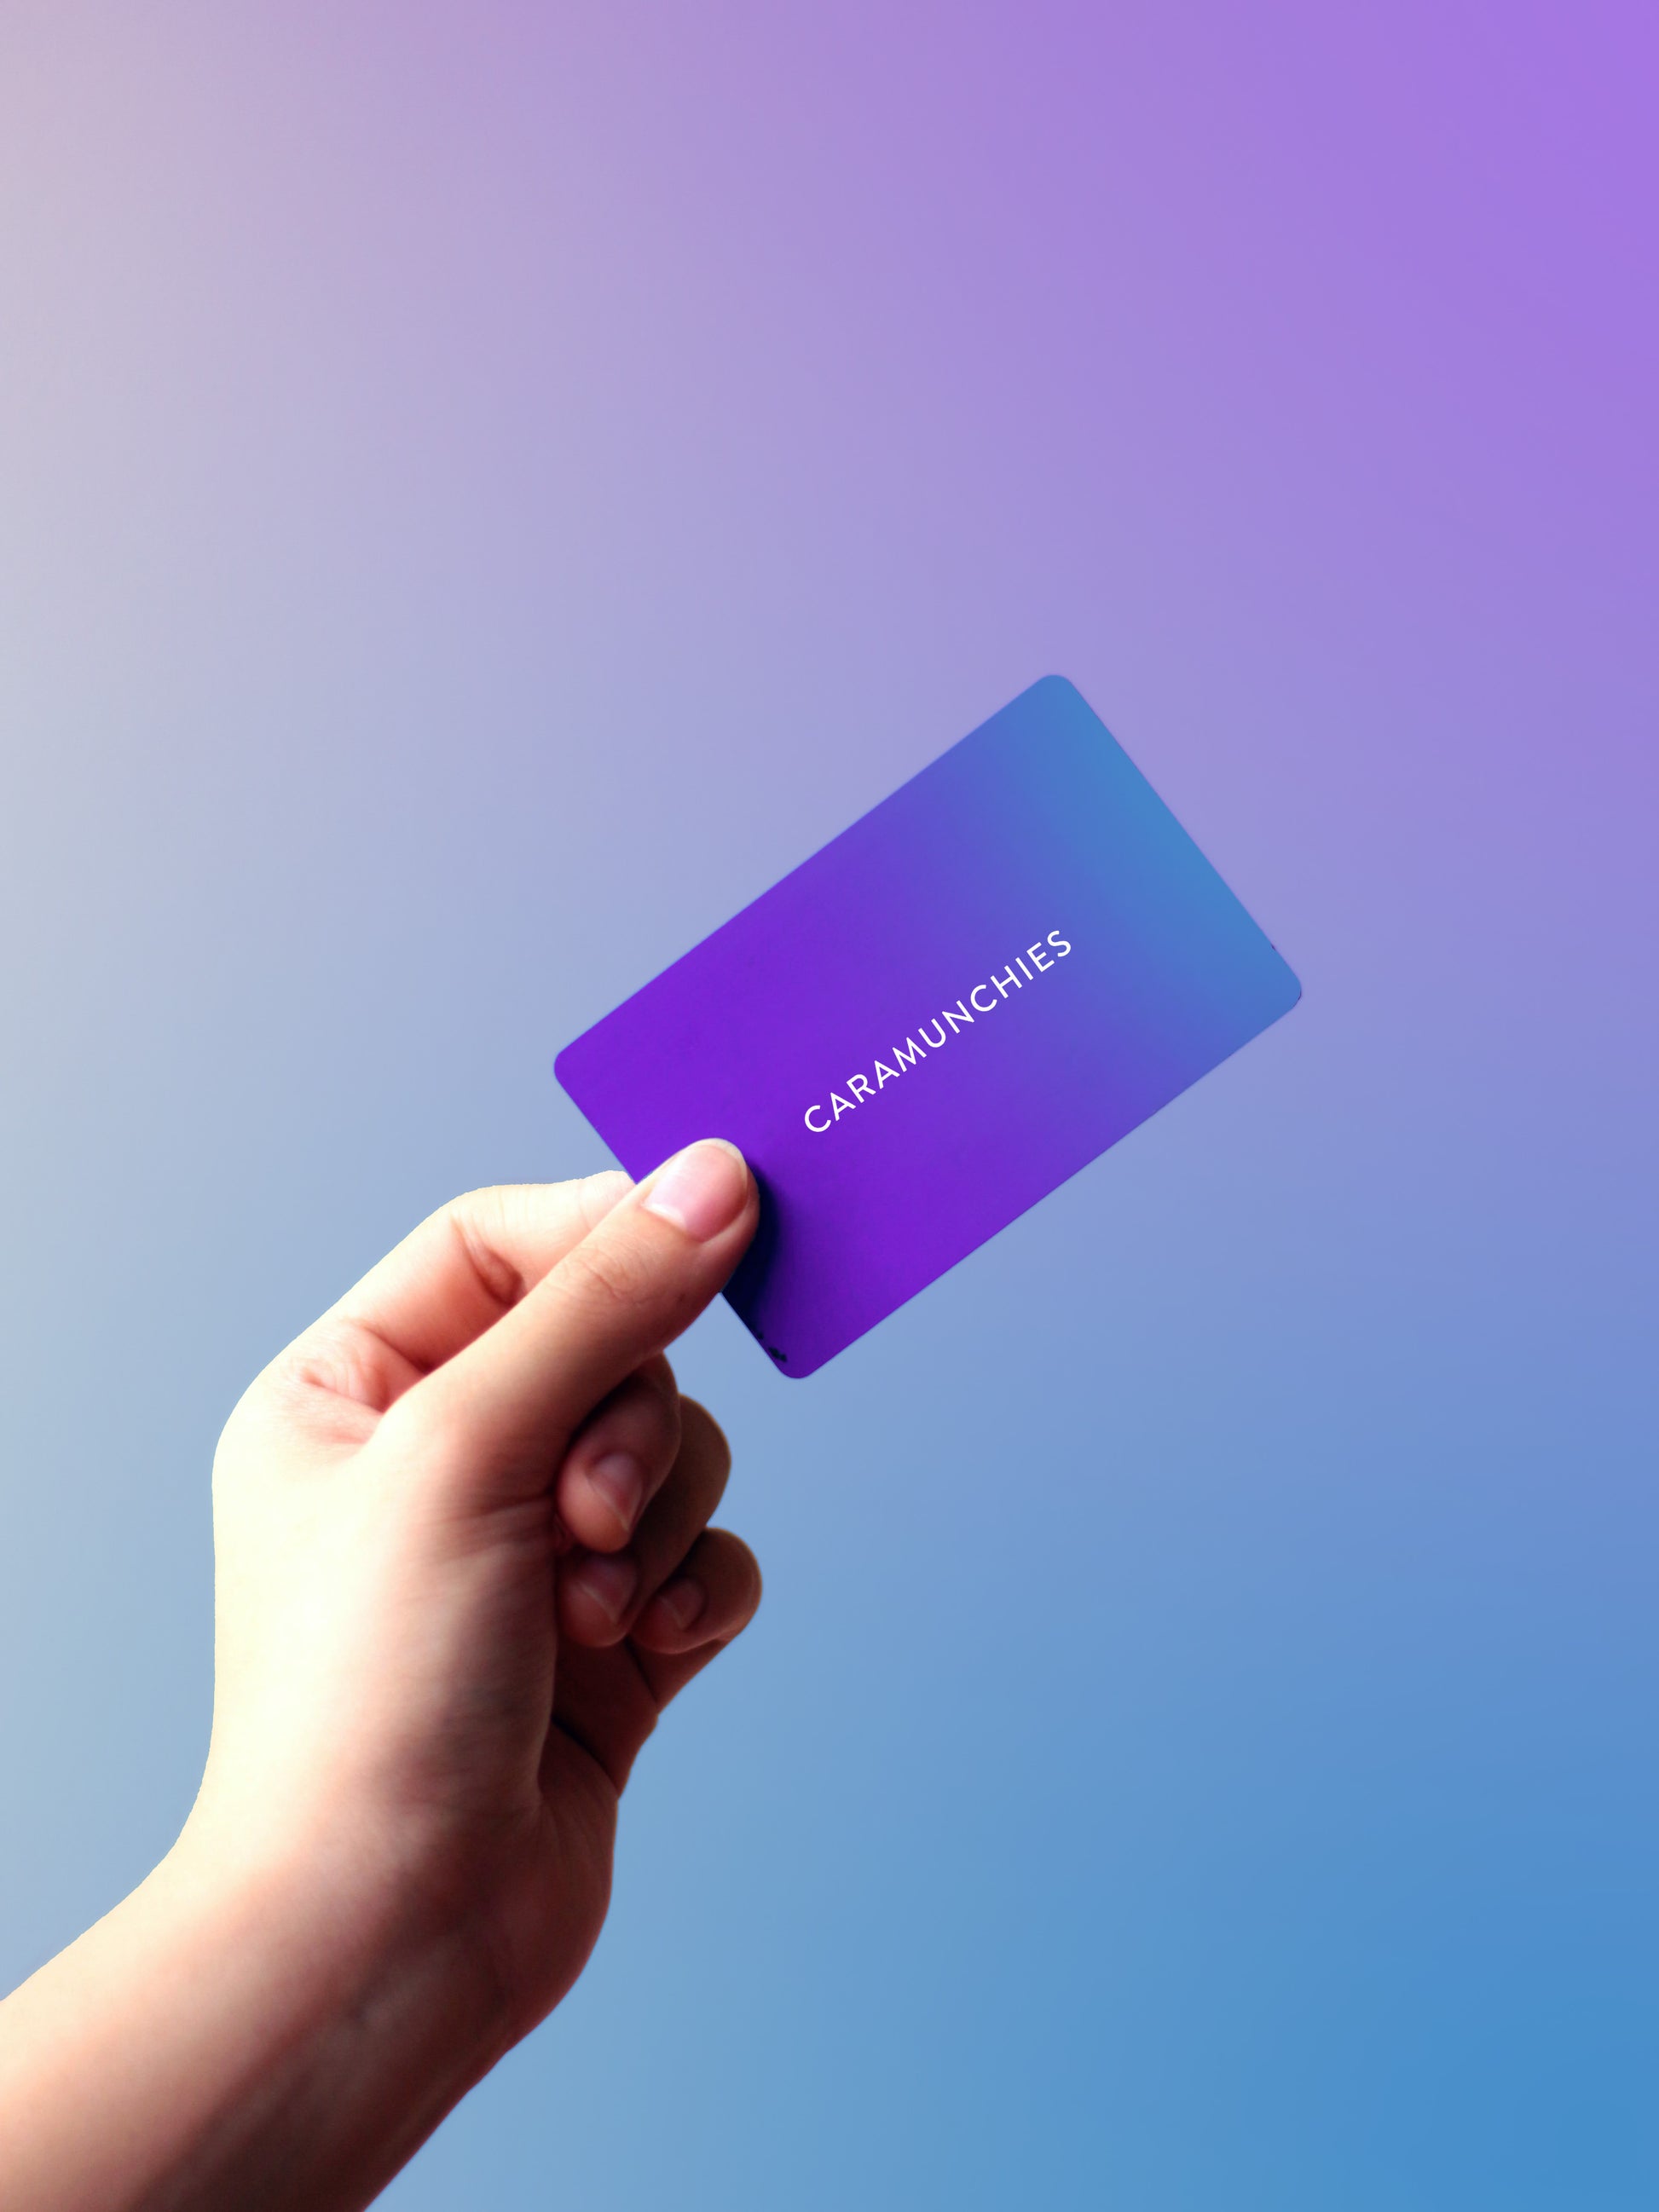 Hand holding a gift card that reads "CARAMUNCHIES" on a purple and blue gradient.